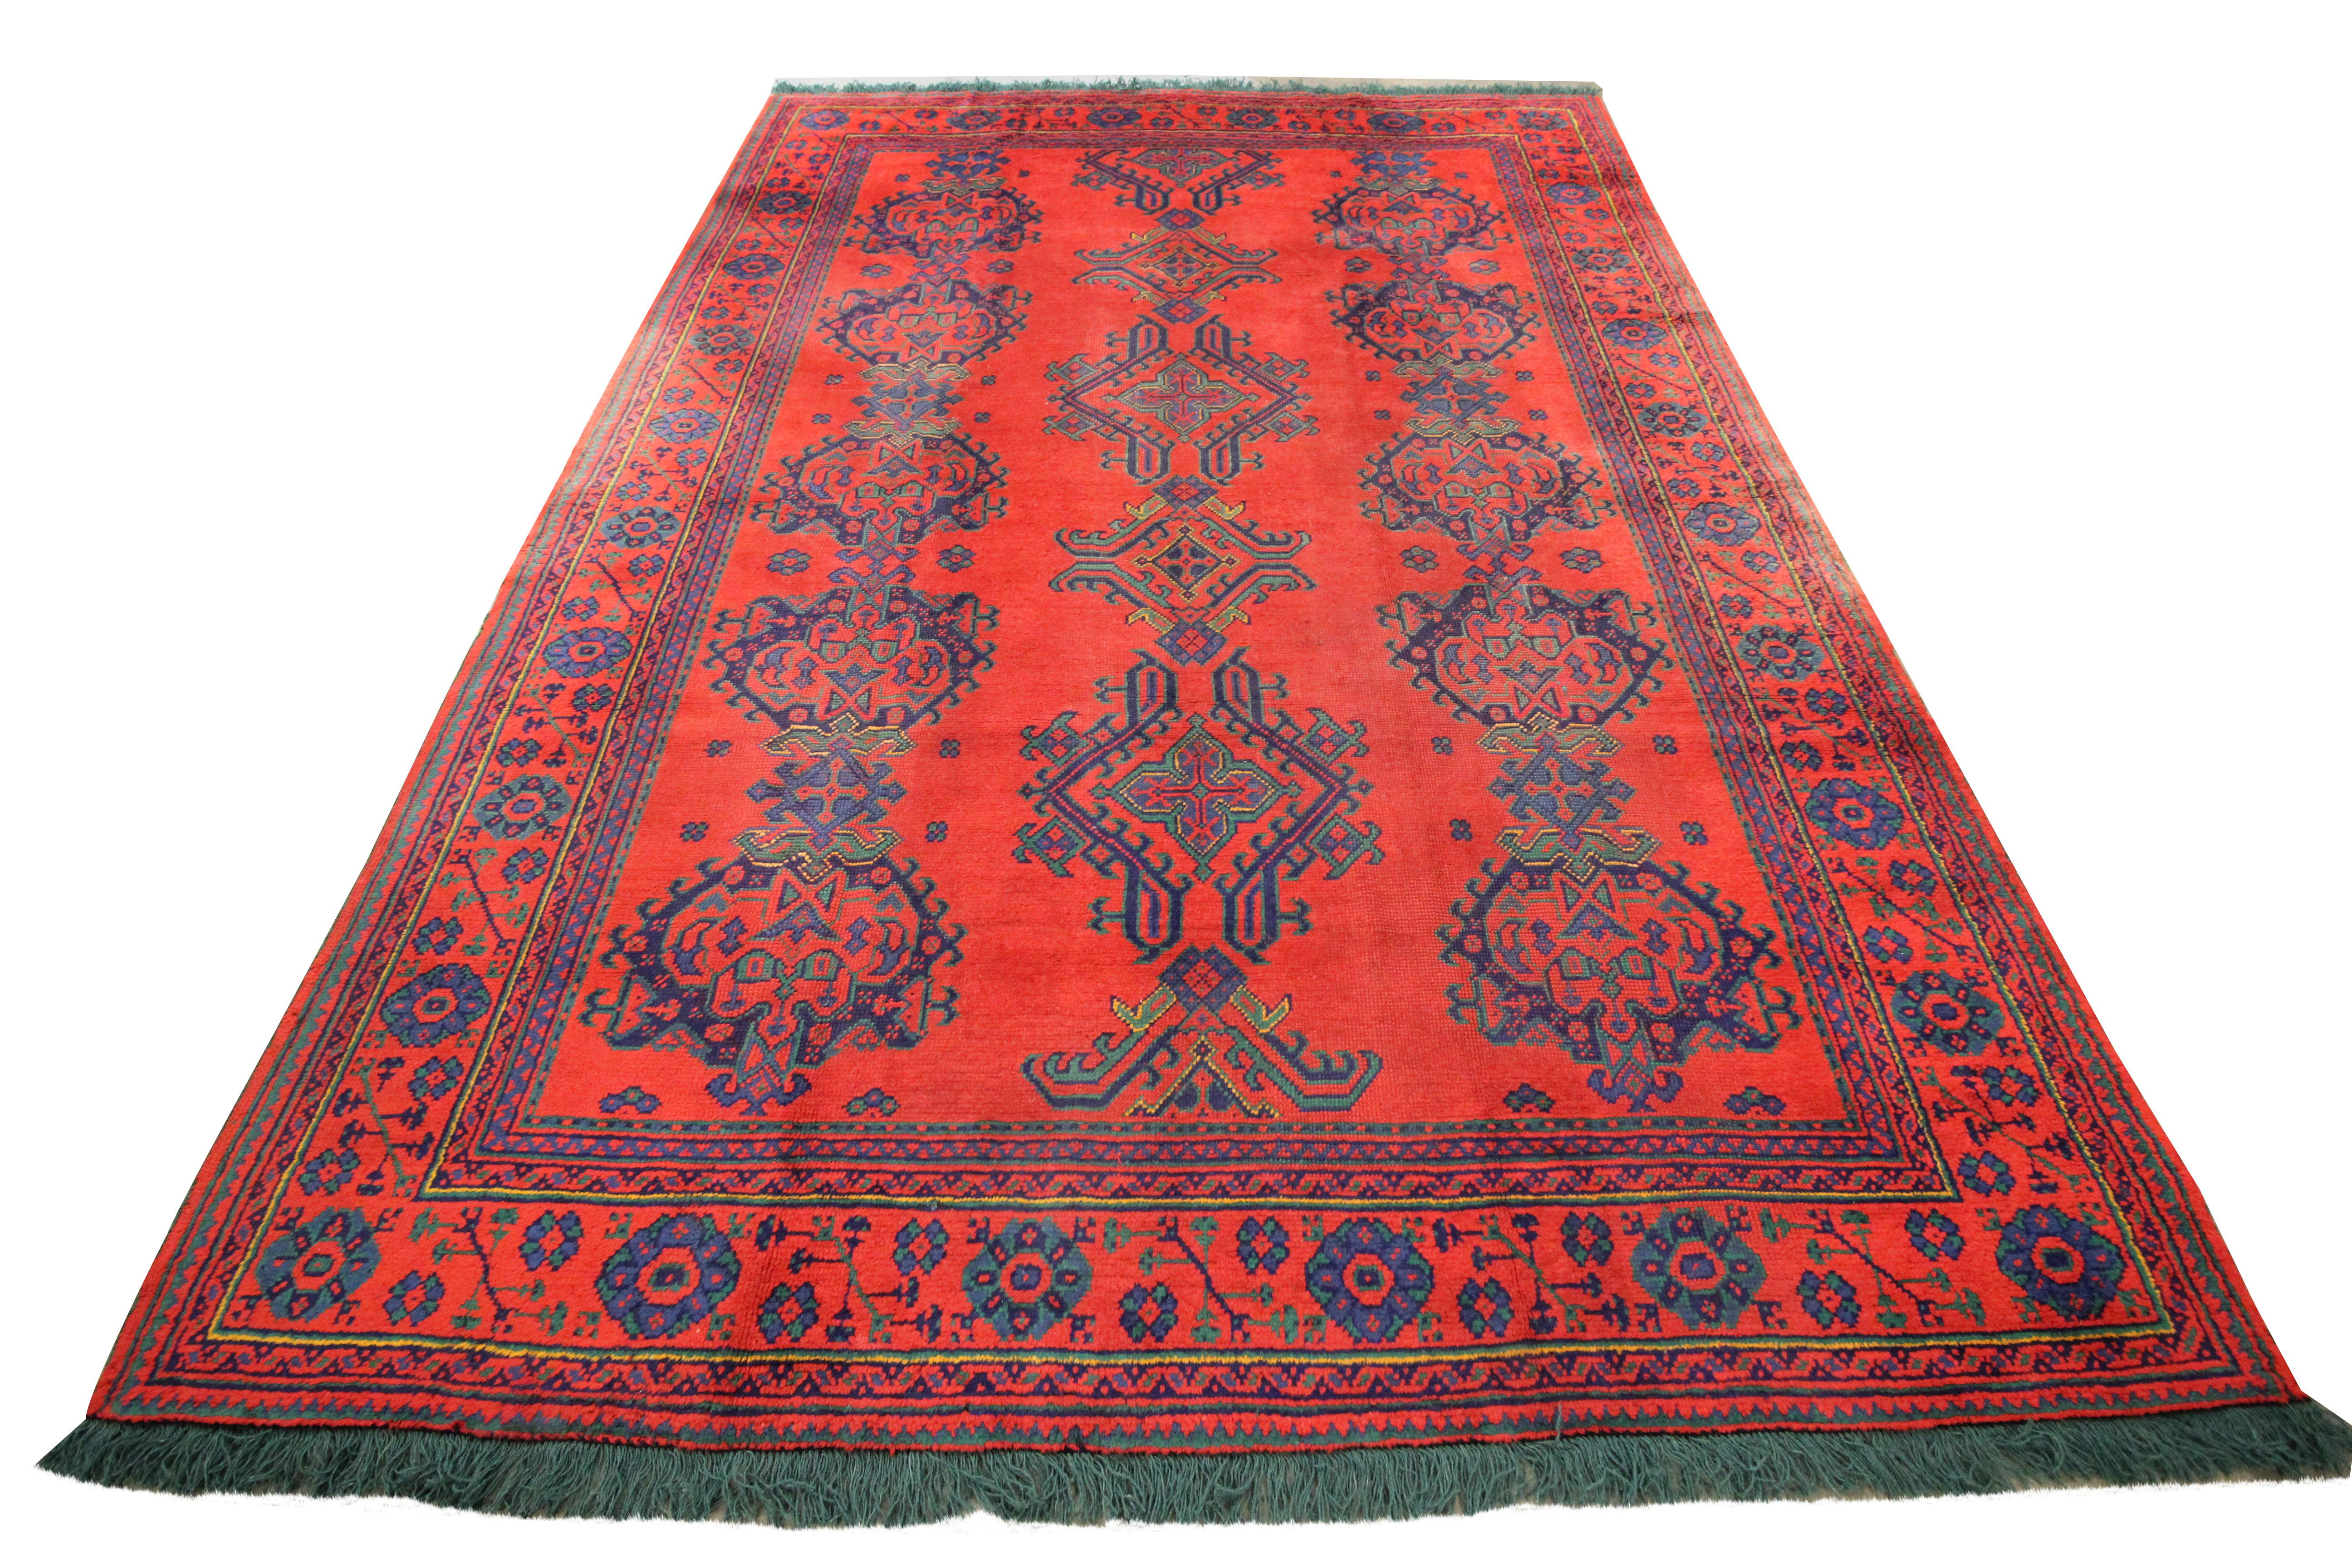 This elegant carpet was woven by hand in Turkey in the 1890s. It is an Ushak rug, Ushak or Oushak carpets are named after the city of Usak, one of the larger towns of Anatolia, a major centre for rug production. Ushak rugs frequently feature family